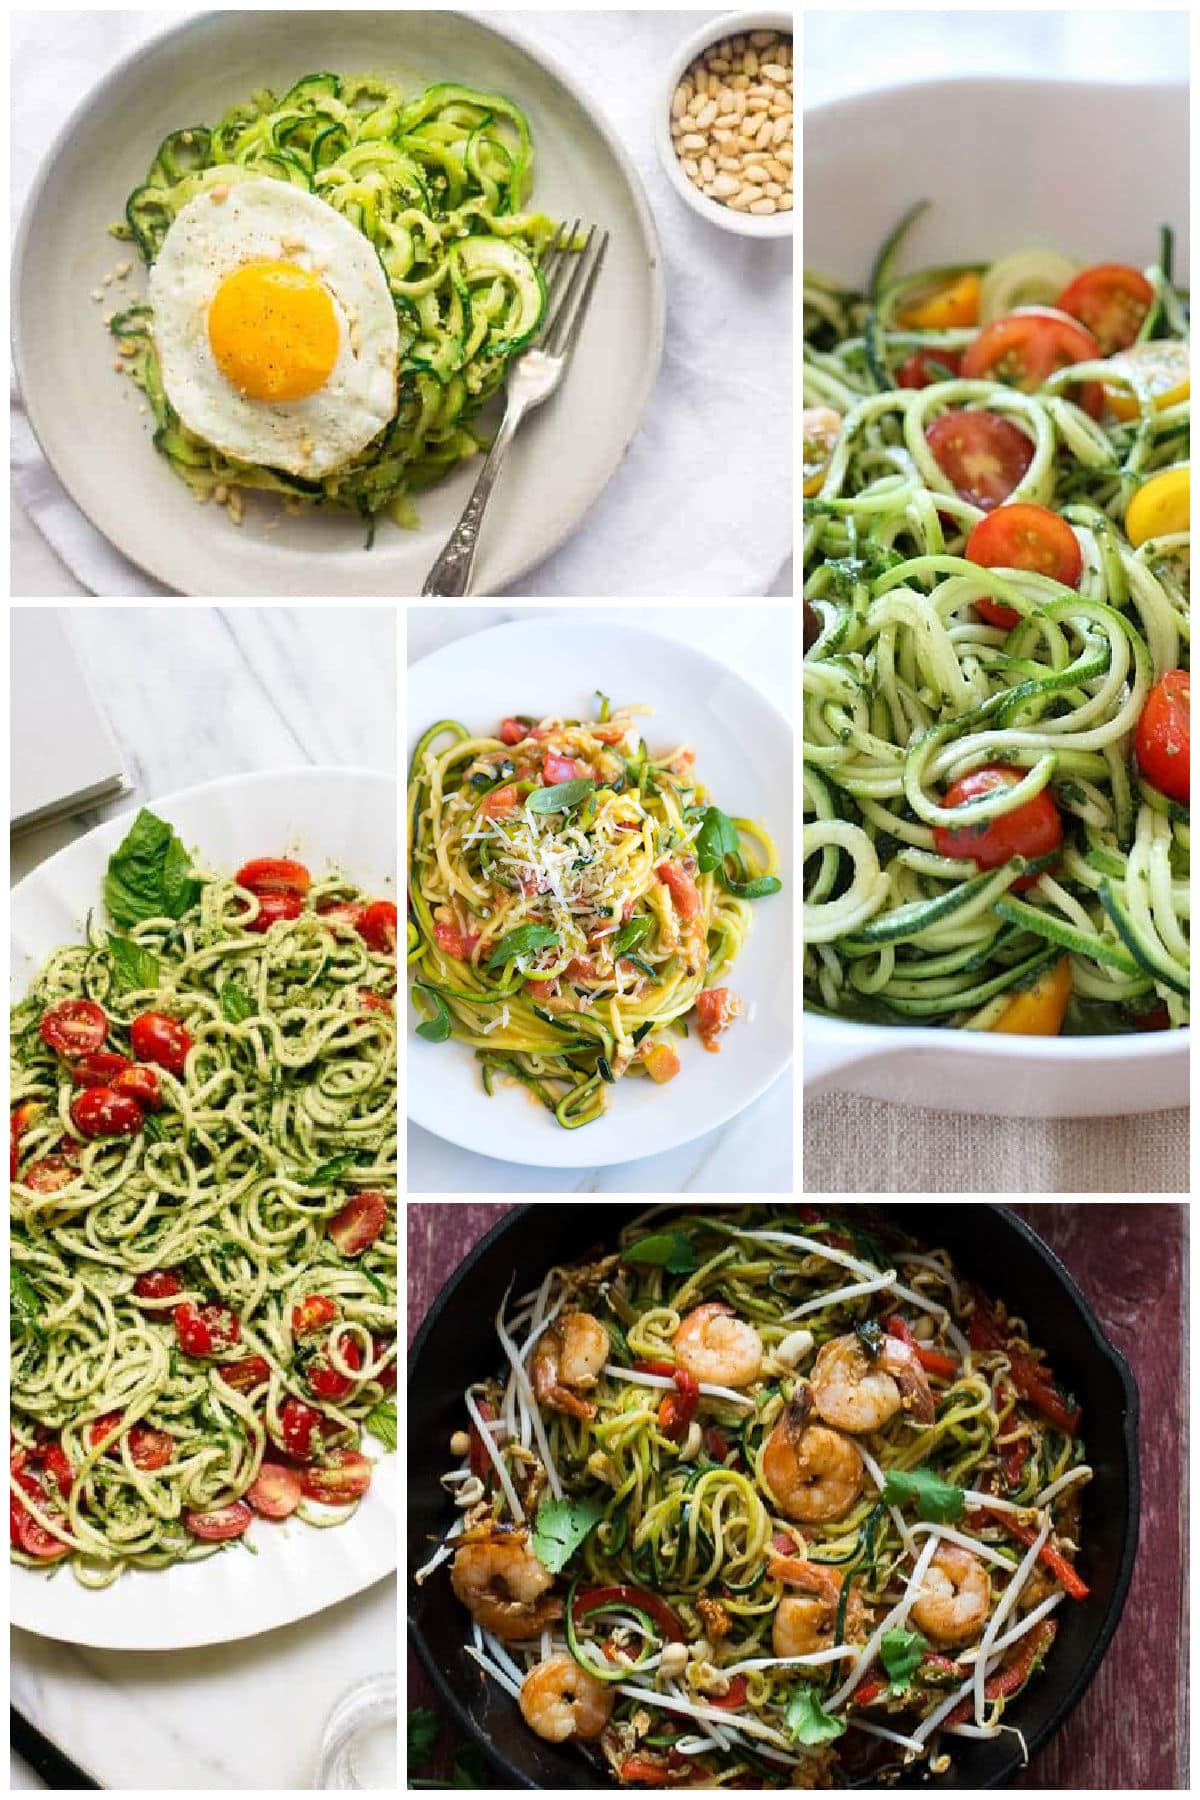 Several images in a group of nutritious zucchini noodle dishes like zucchini pesto noodles, garlic parmesan zucchini noodles and zucchini noodle pad Thai.